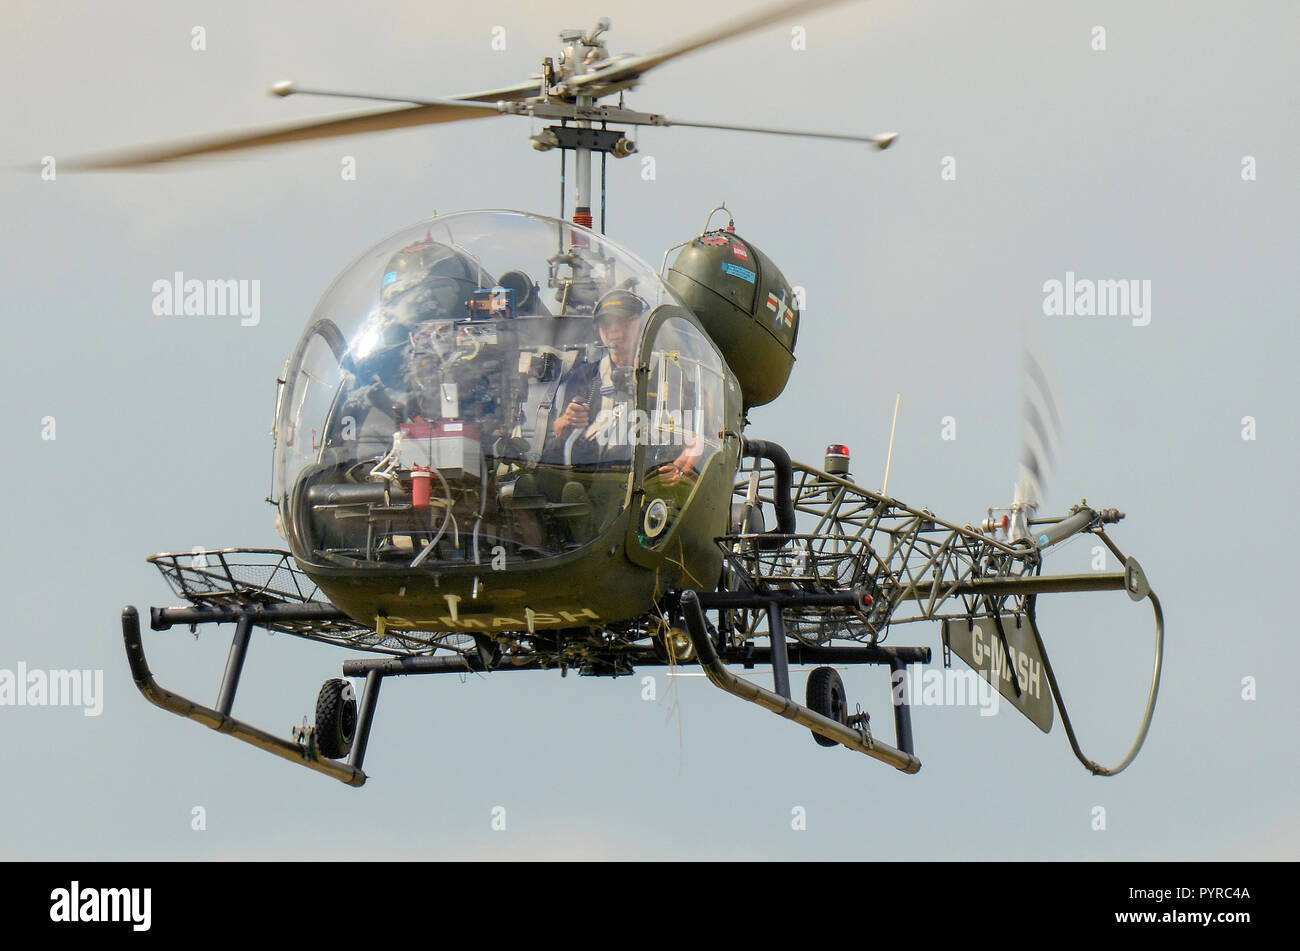 Bell 47G vintage helicopter G-MASH representing the medical evacuation helicopter used in the TV programme MASH of the Korean War flying Stock Photo